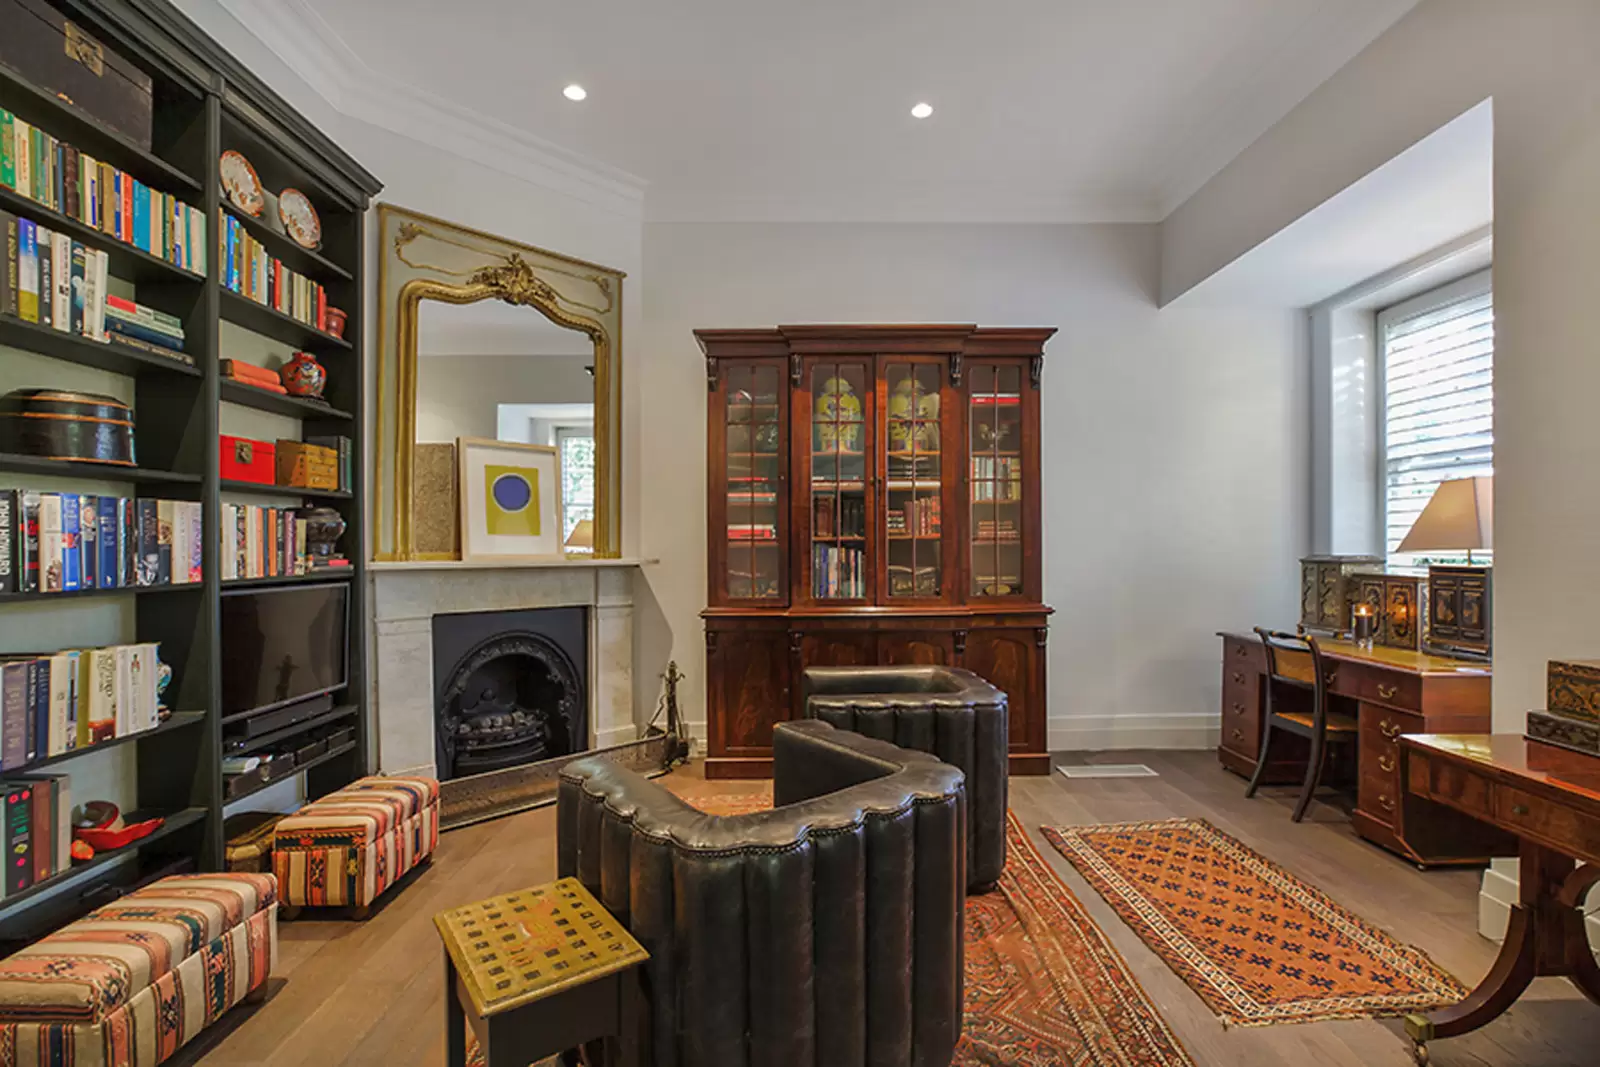 Photo #6: 8 Rosemont Avenue, Woollahra - For Sale by Sydney Sotheby's International Realty